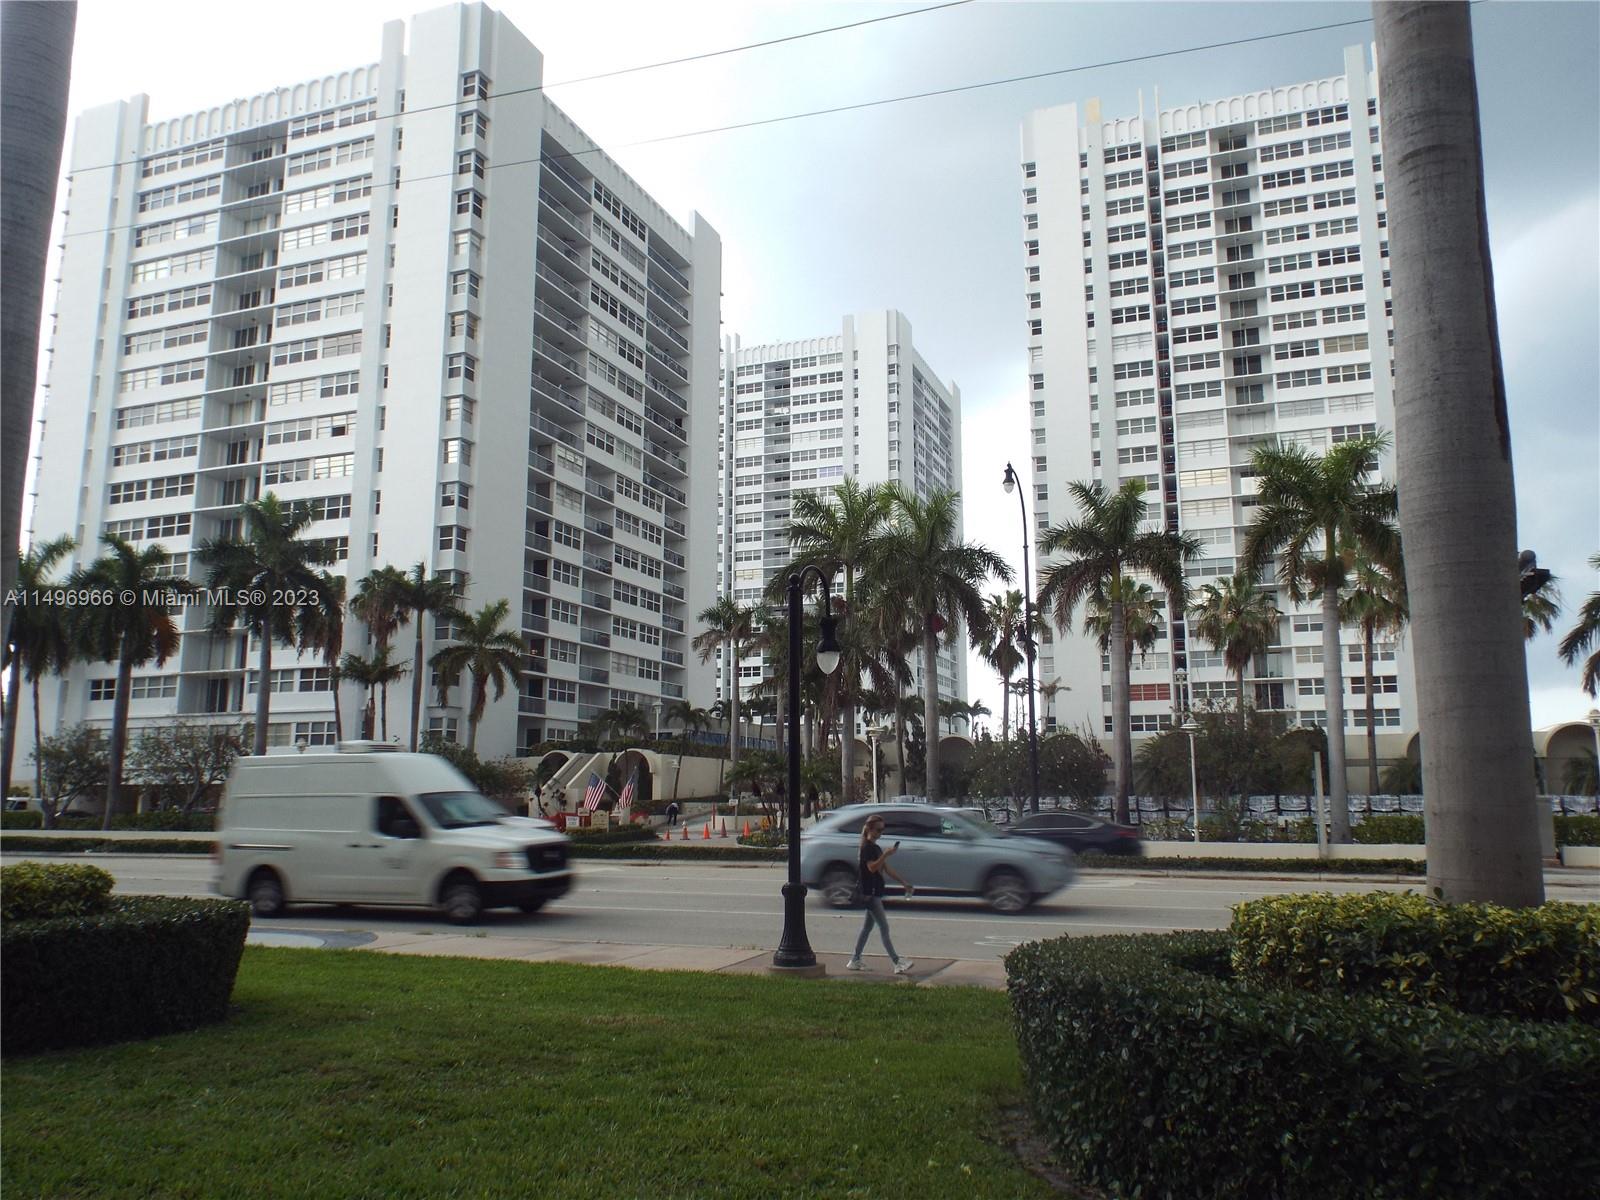 a view of a city with tall buildings and a yard